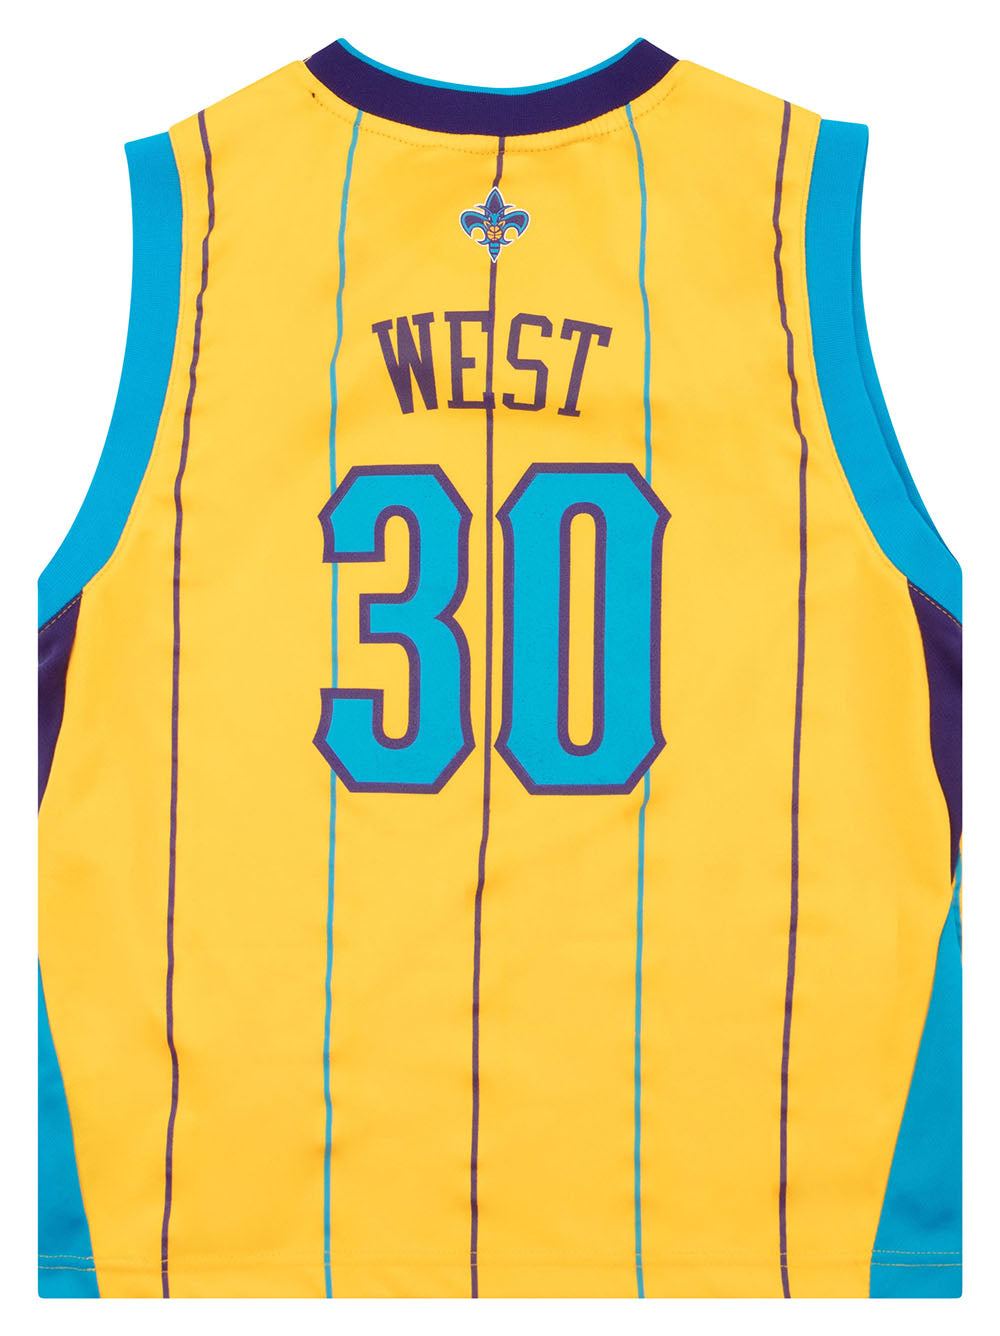 2011-13 NEW ORLEANS HORNETS WEST #30 ADIDAS JERSEY (ALTERNATE) Y